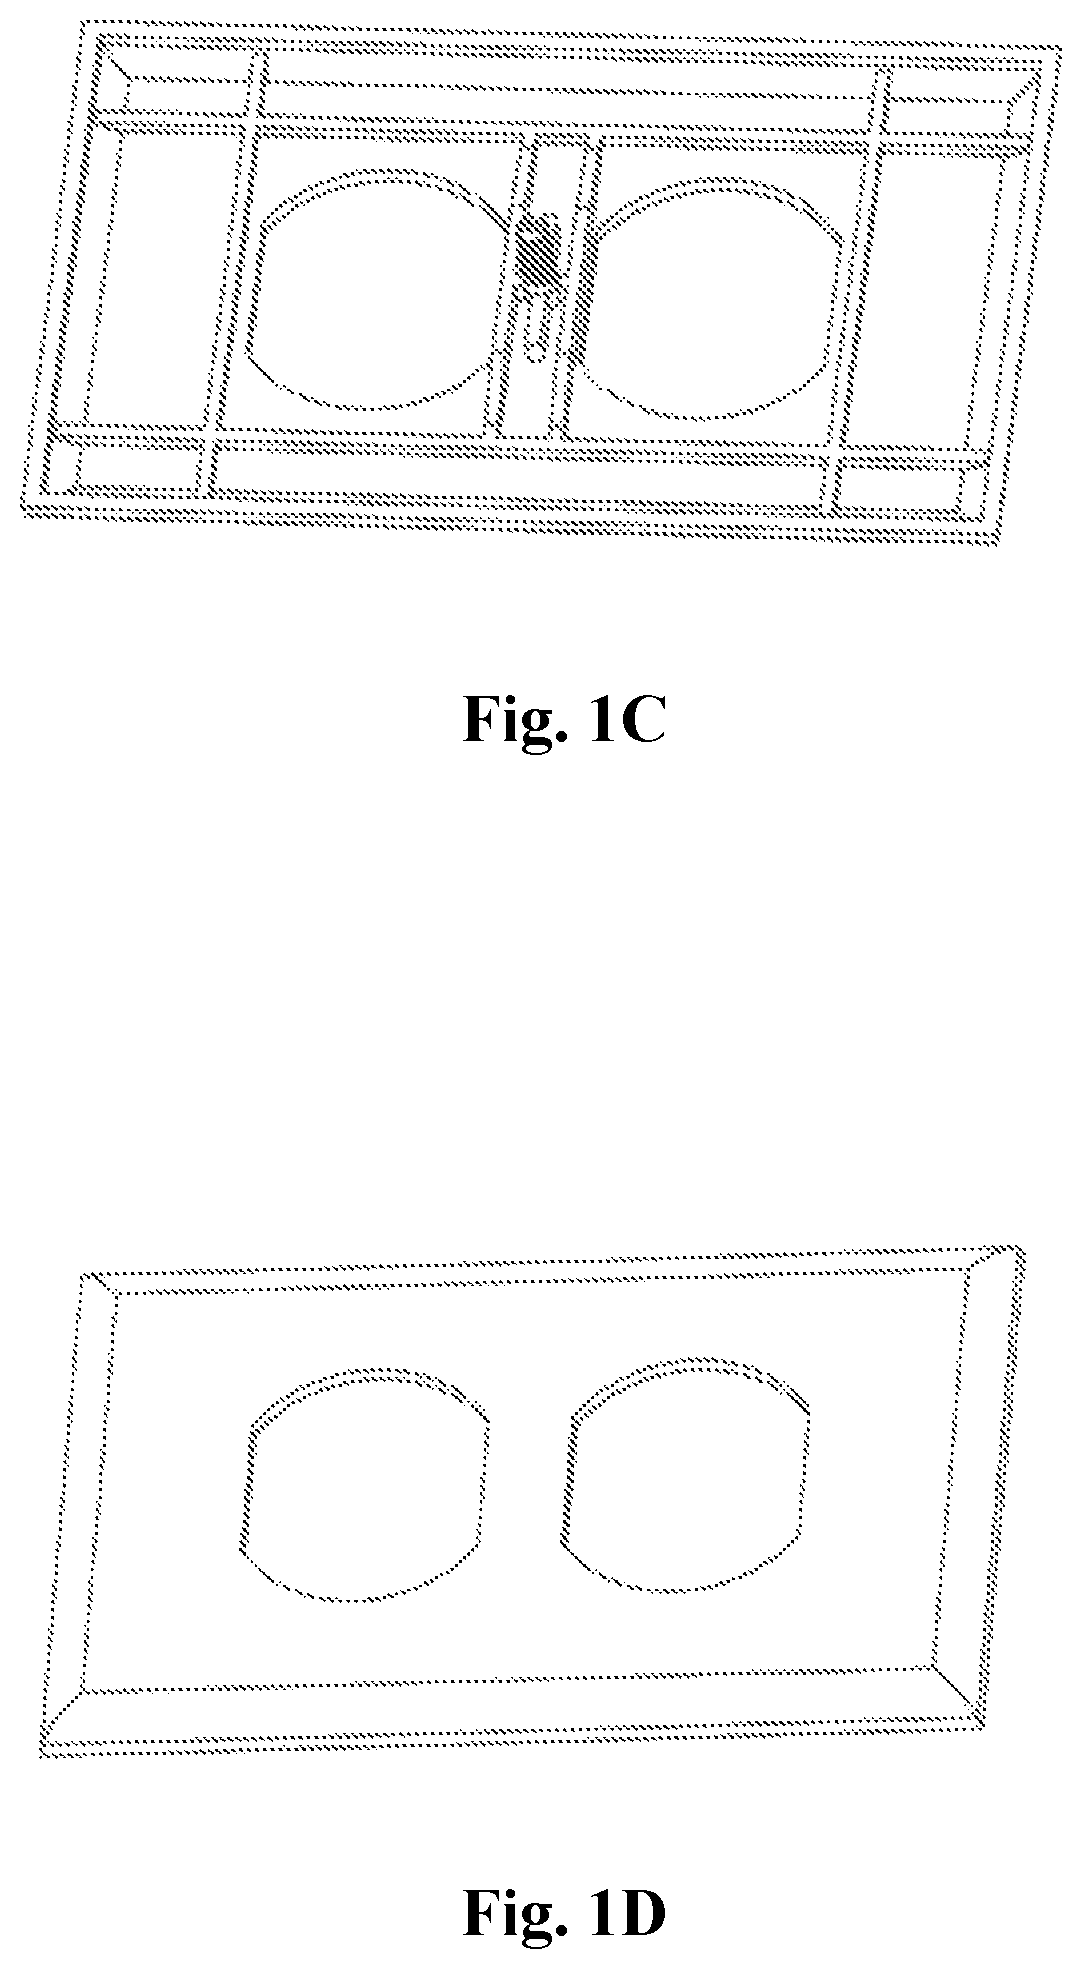 Screw less cover plate for electrical fixtures